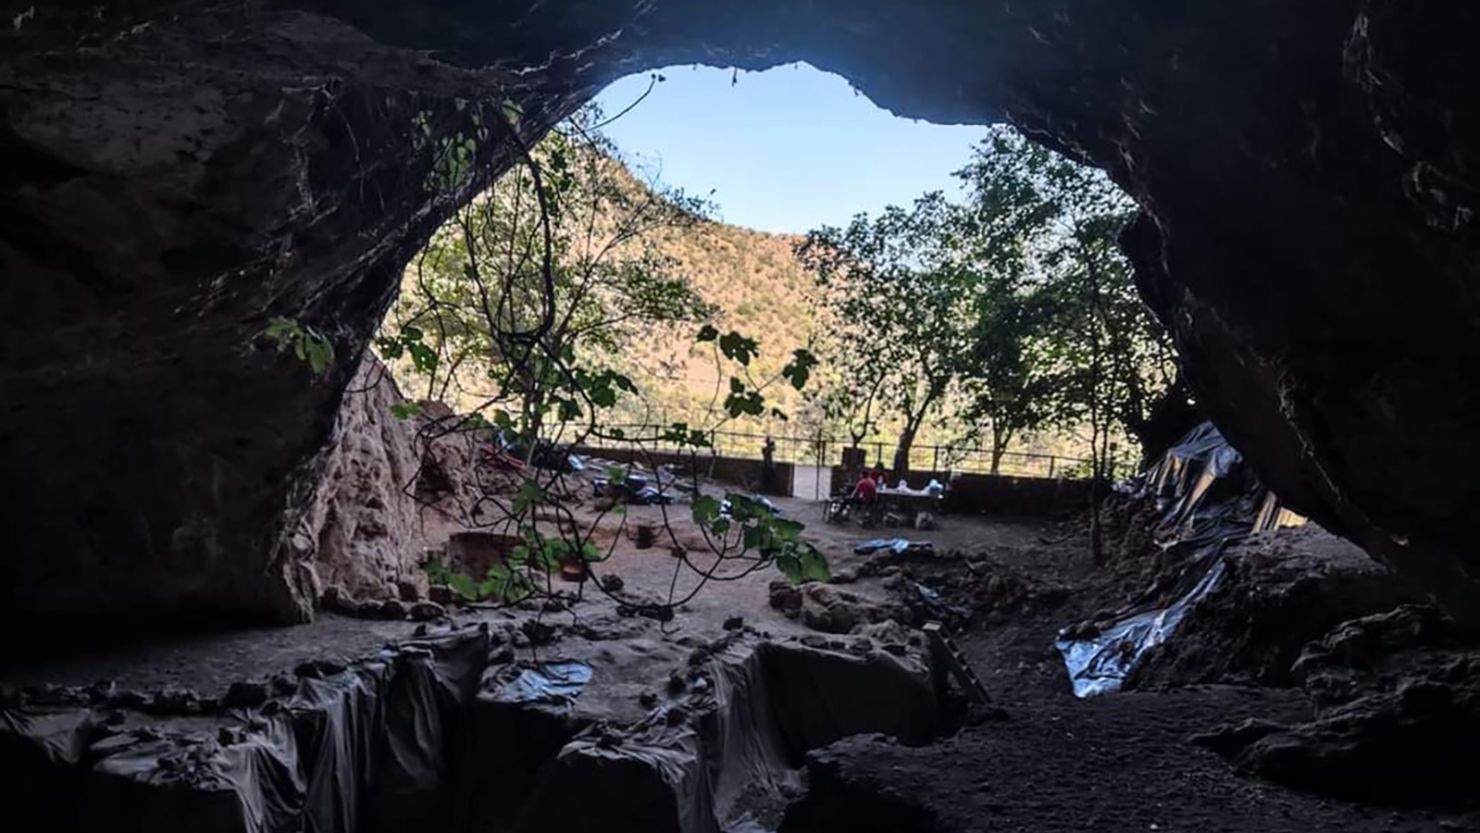 Researchers gleaned insights into ancient diets by studying human remains unearthed from Taforalt Cave in Morocco.